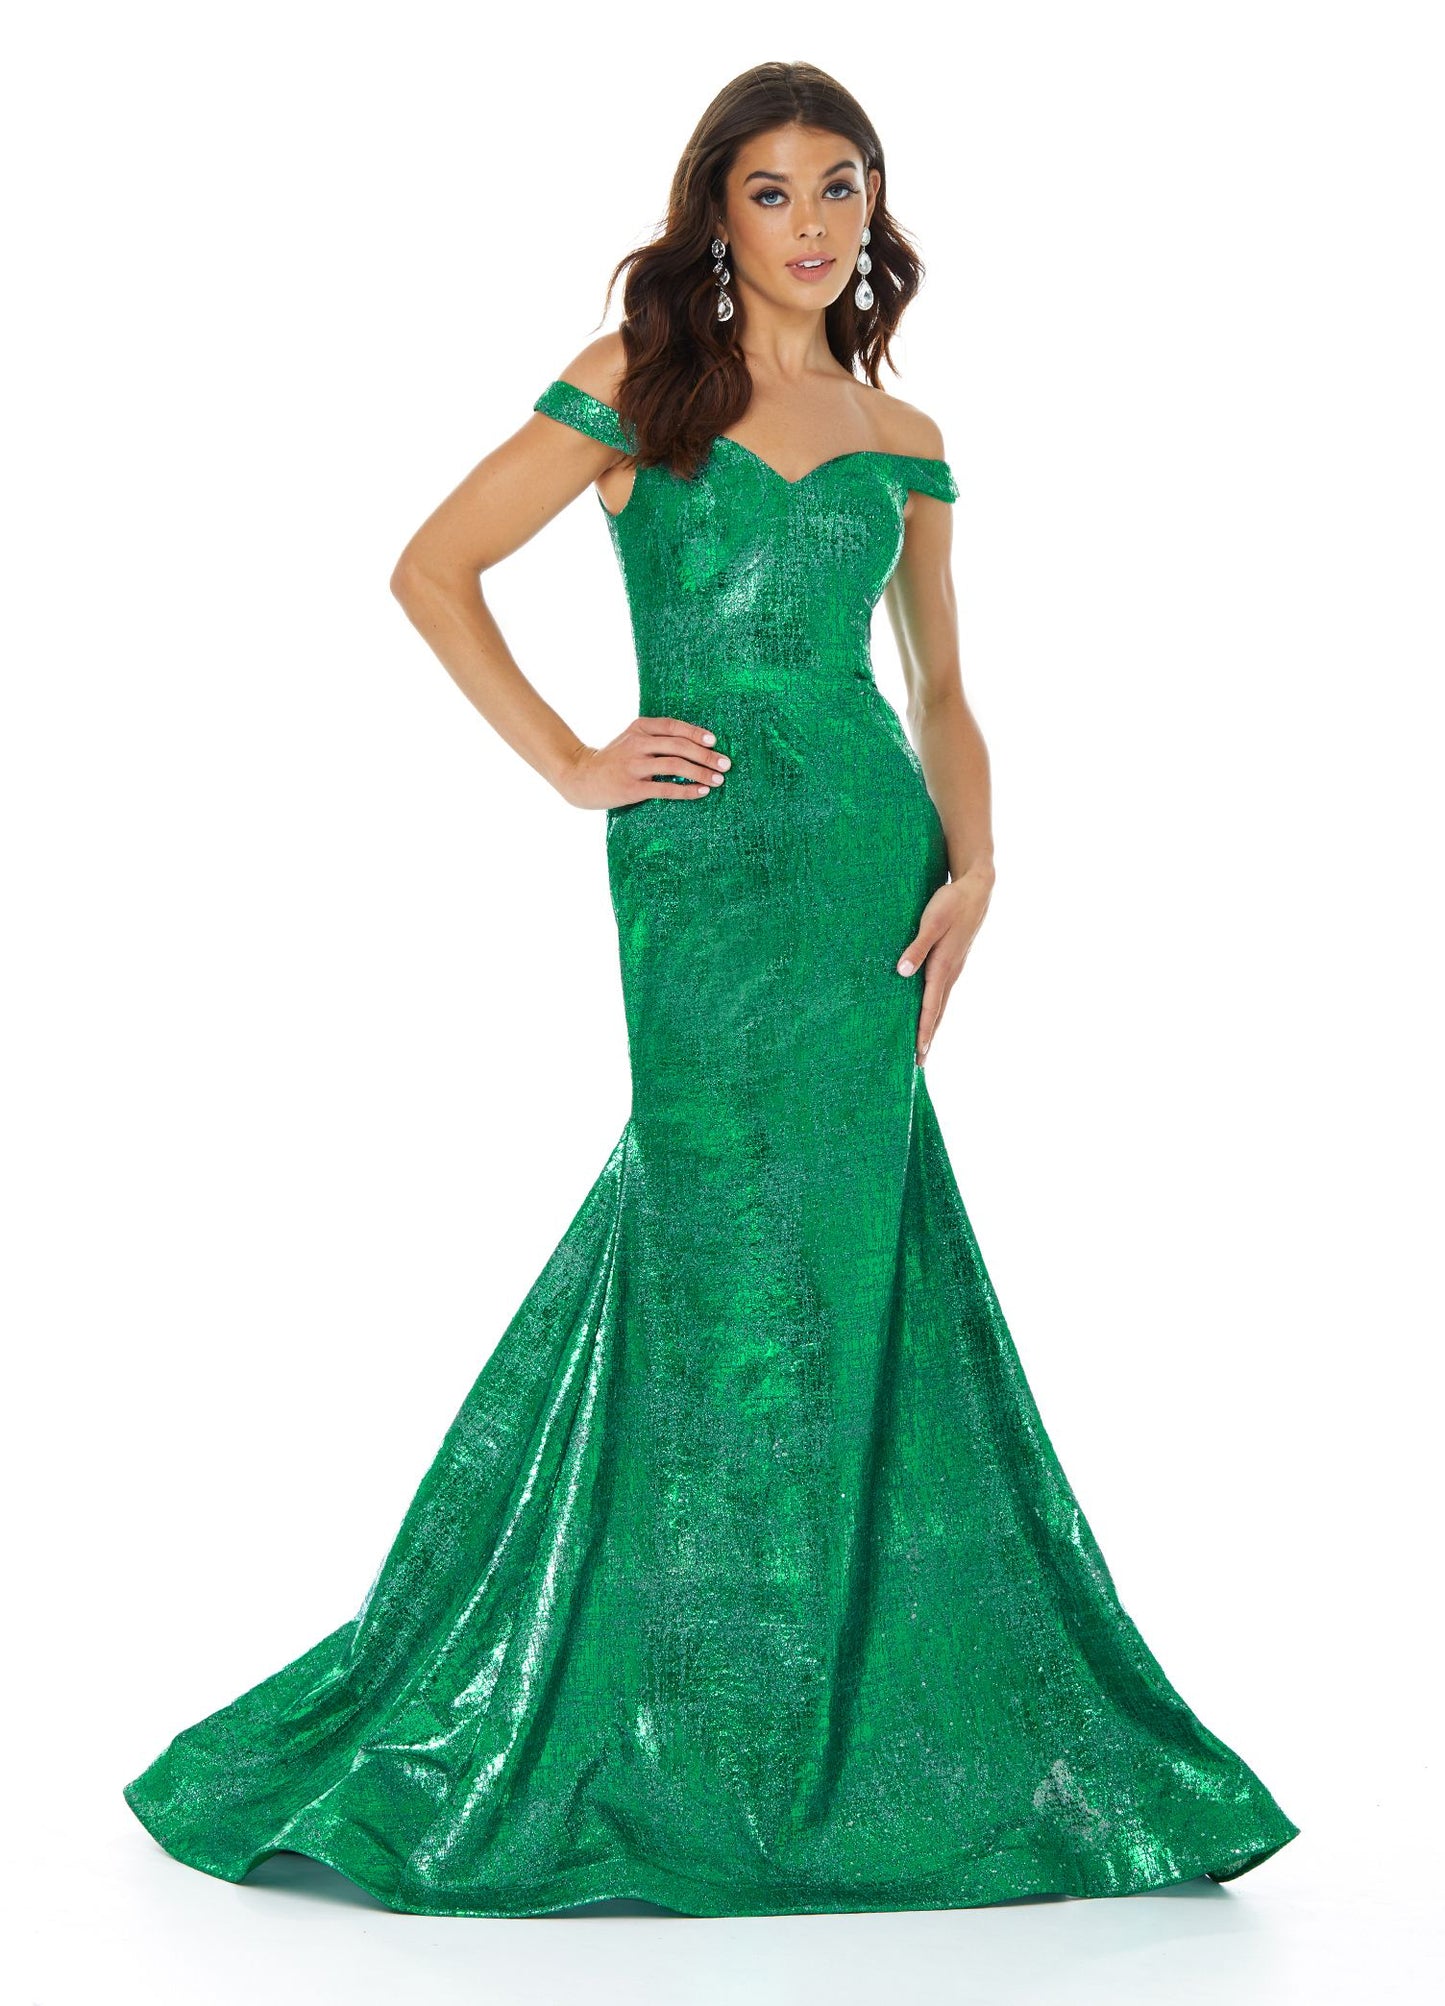 Ashley Lauren 11007 Let your curves do the talking in this off shoulder metallic jersey mermaid prom dress. The skirt on this evening pageant gown is finished with horsehair.  Colors  Emerald, Royal, Silver  Sizes 0, 2, 4, 6, 8, 10, 12, 14, 16, 18  Off Shoulder Metallic Jersey Mermaid Train